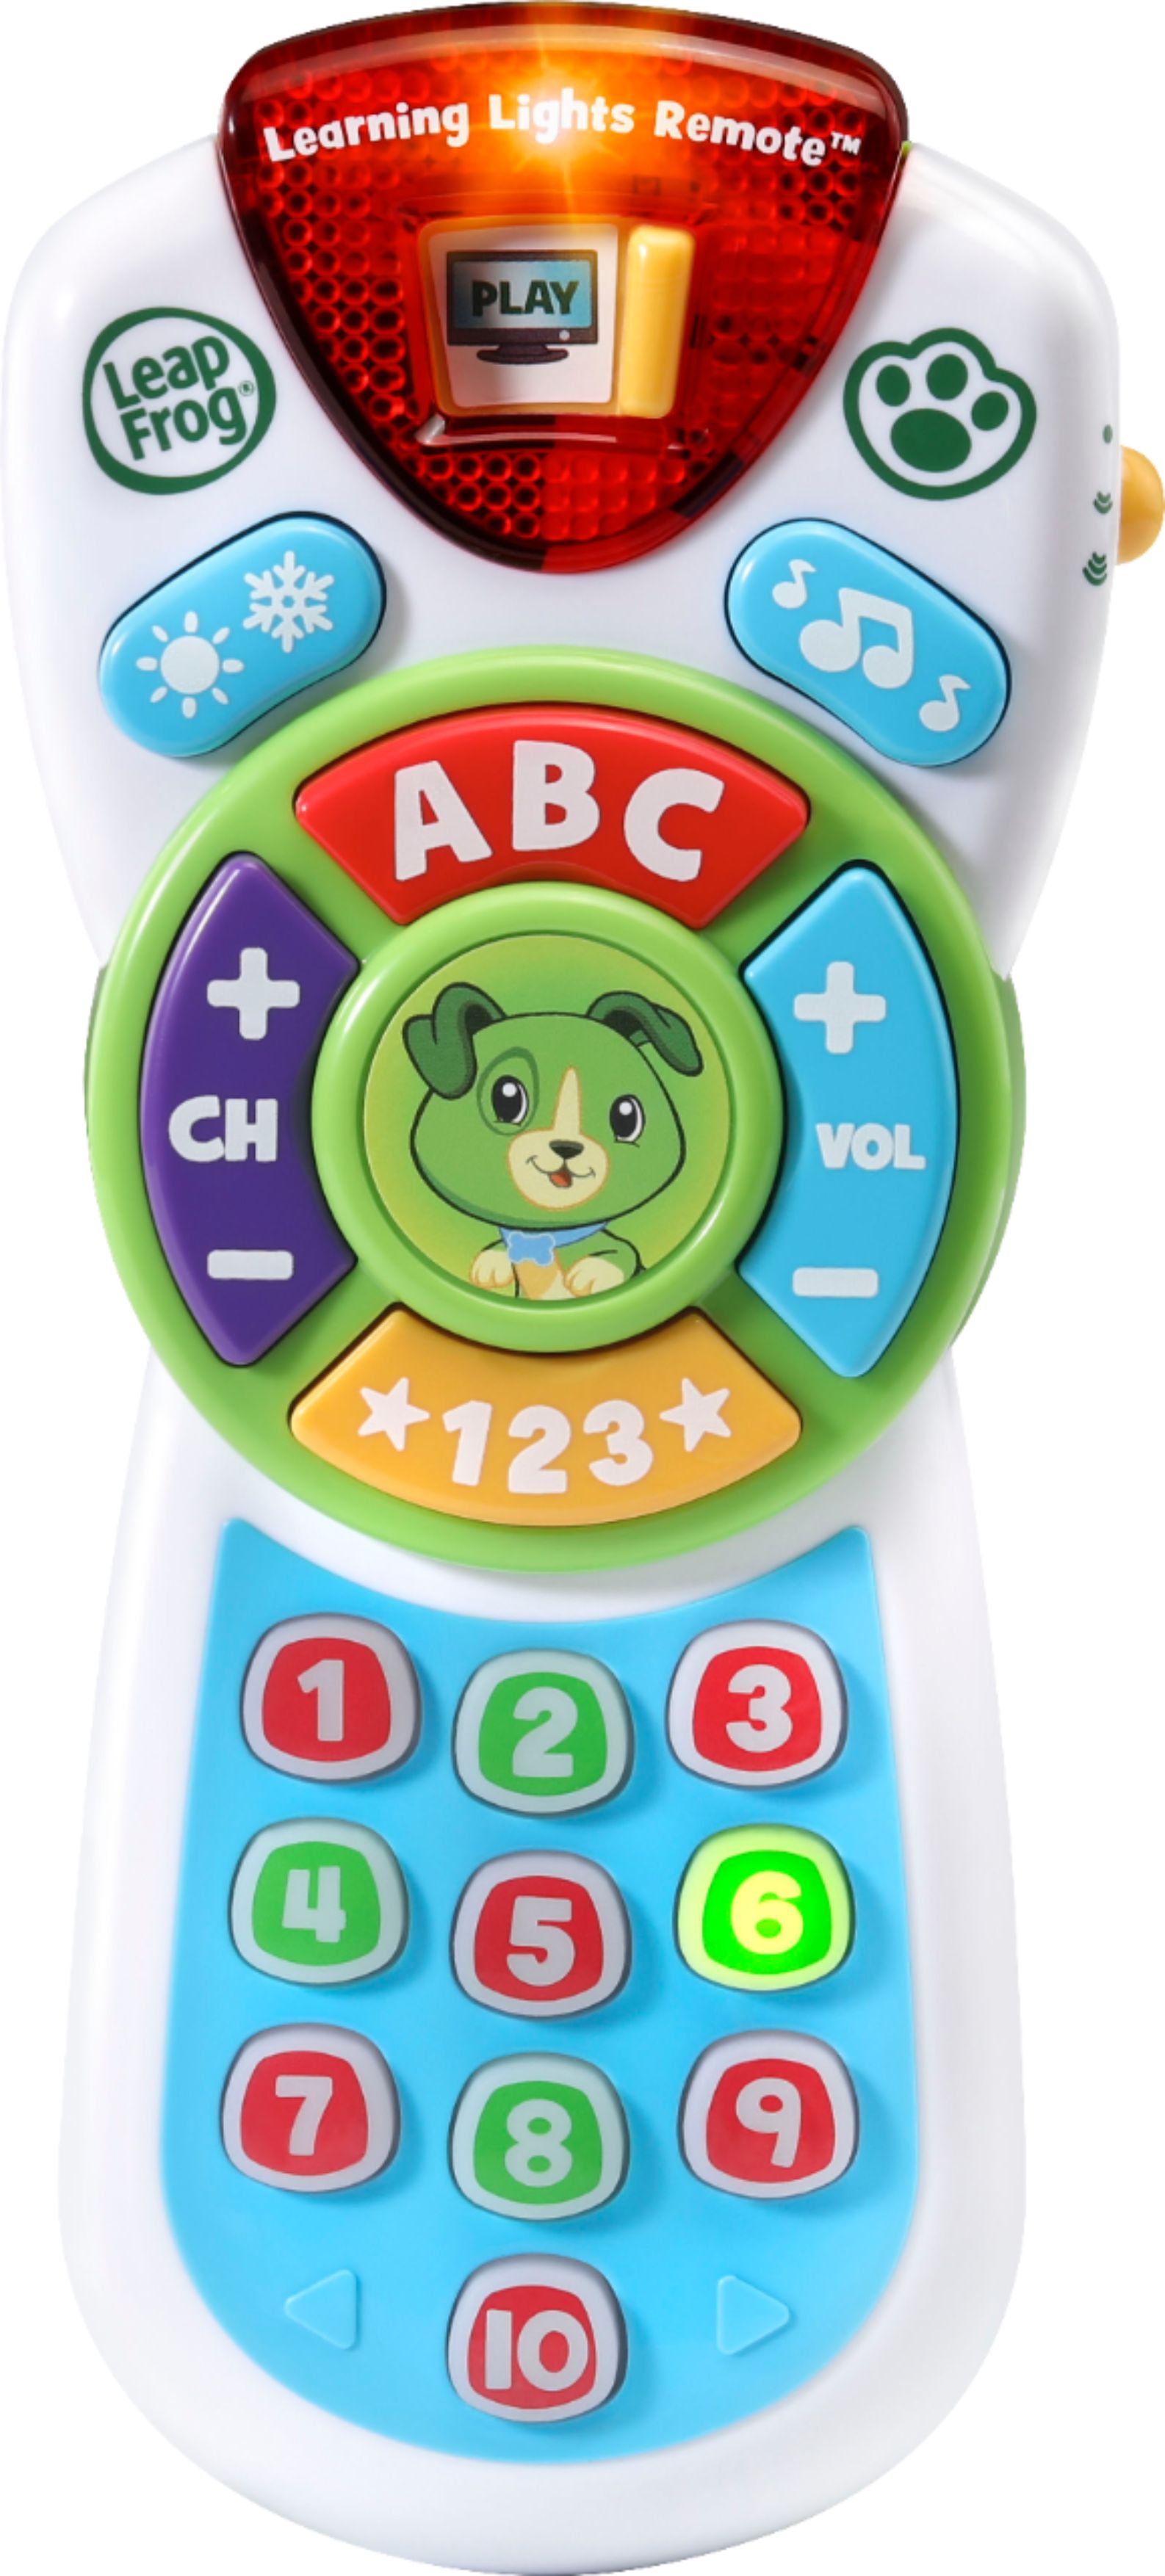 LeapFrog - Scout's Learning Lights Remote Deluxe - Multi-color